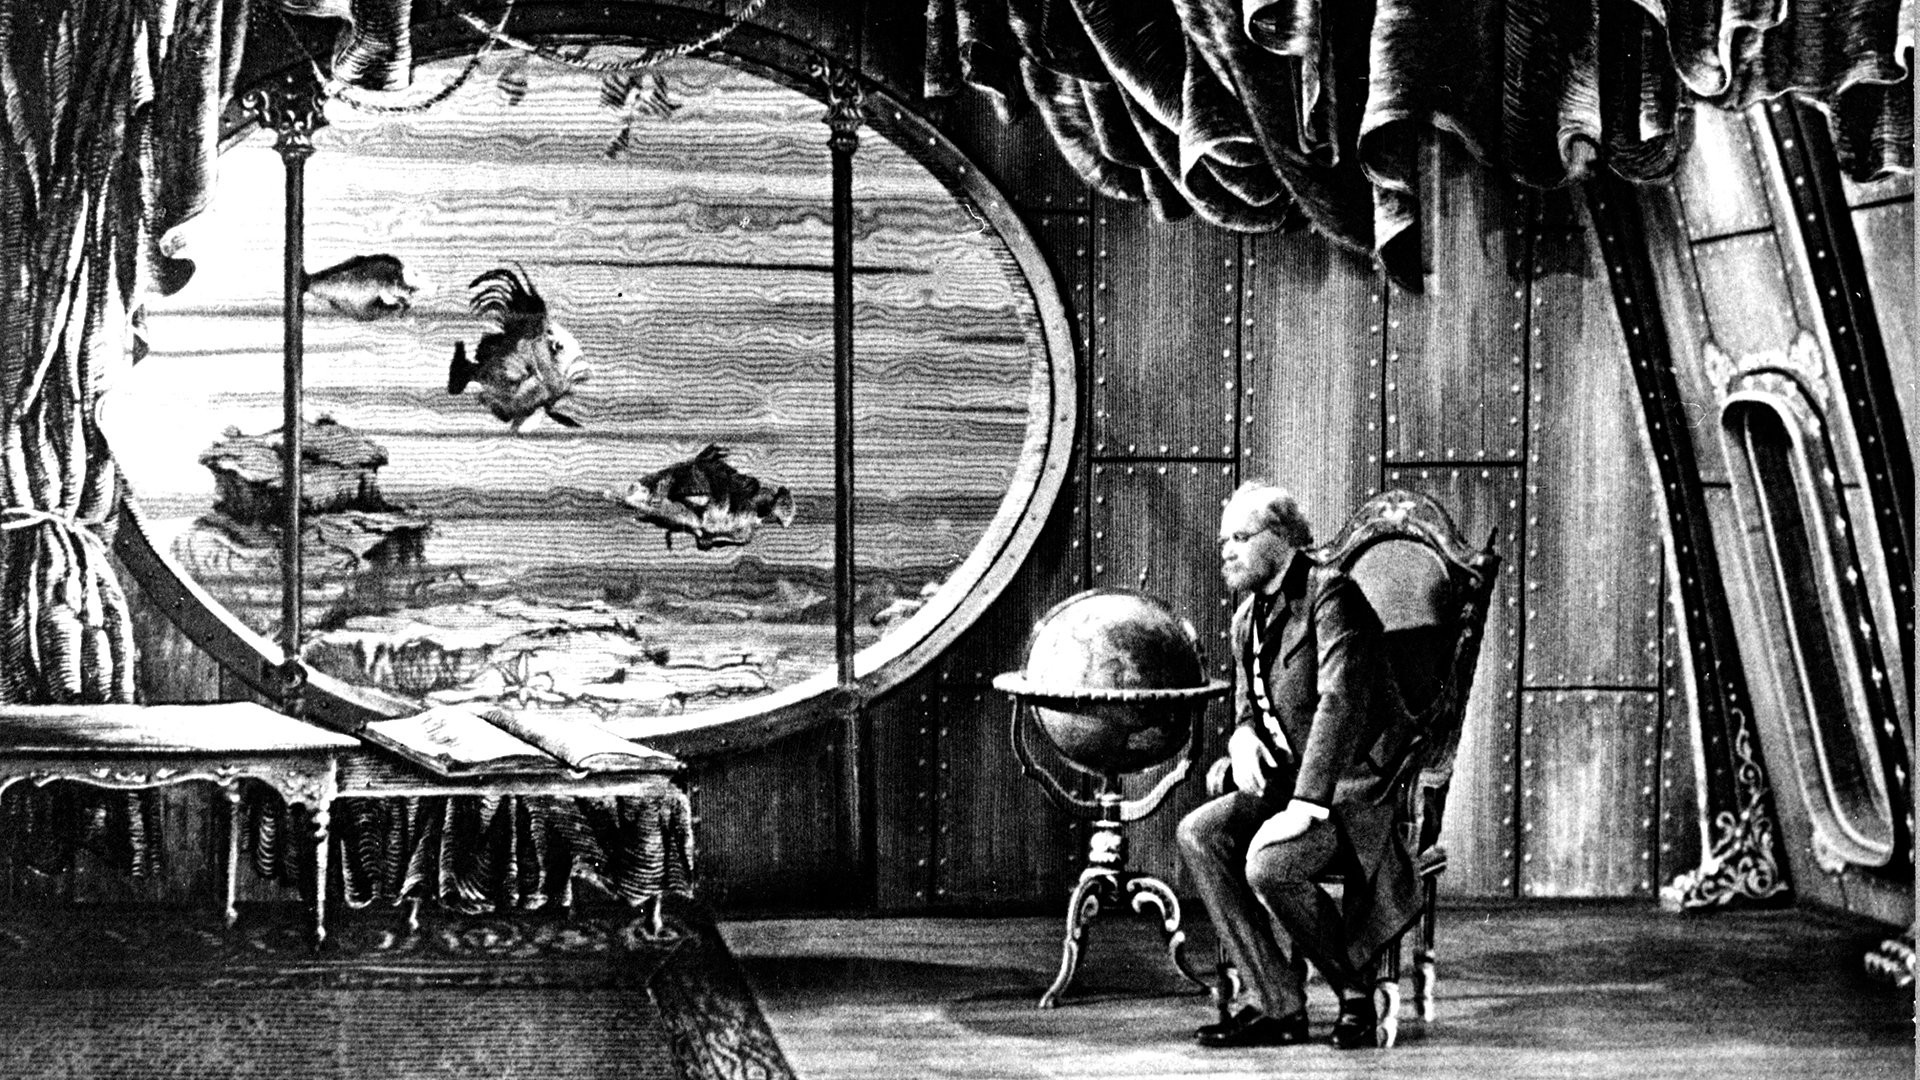 General 1920x1080 Jules Verne fantasy art The Fabulous World of Jules Verne movies monochrome vintage old people czech submarine interior underwater metal window fish globes curtains books screen shot gray